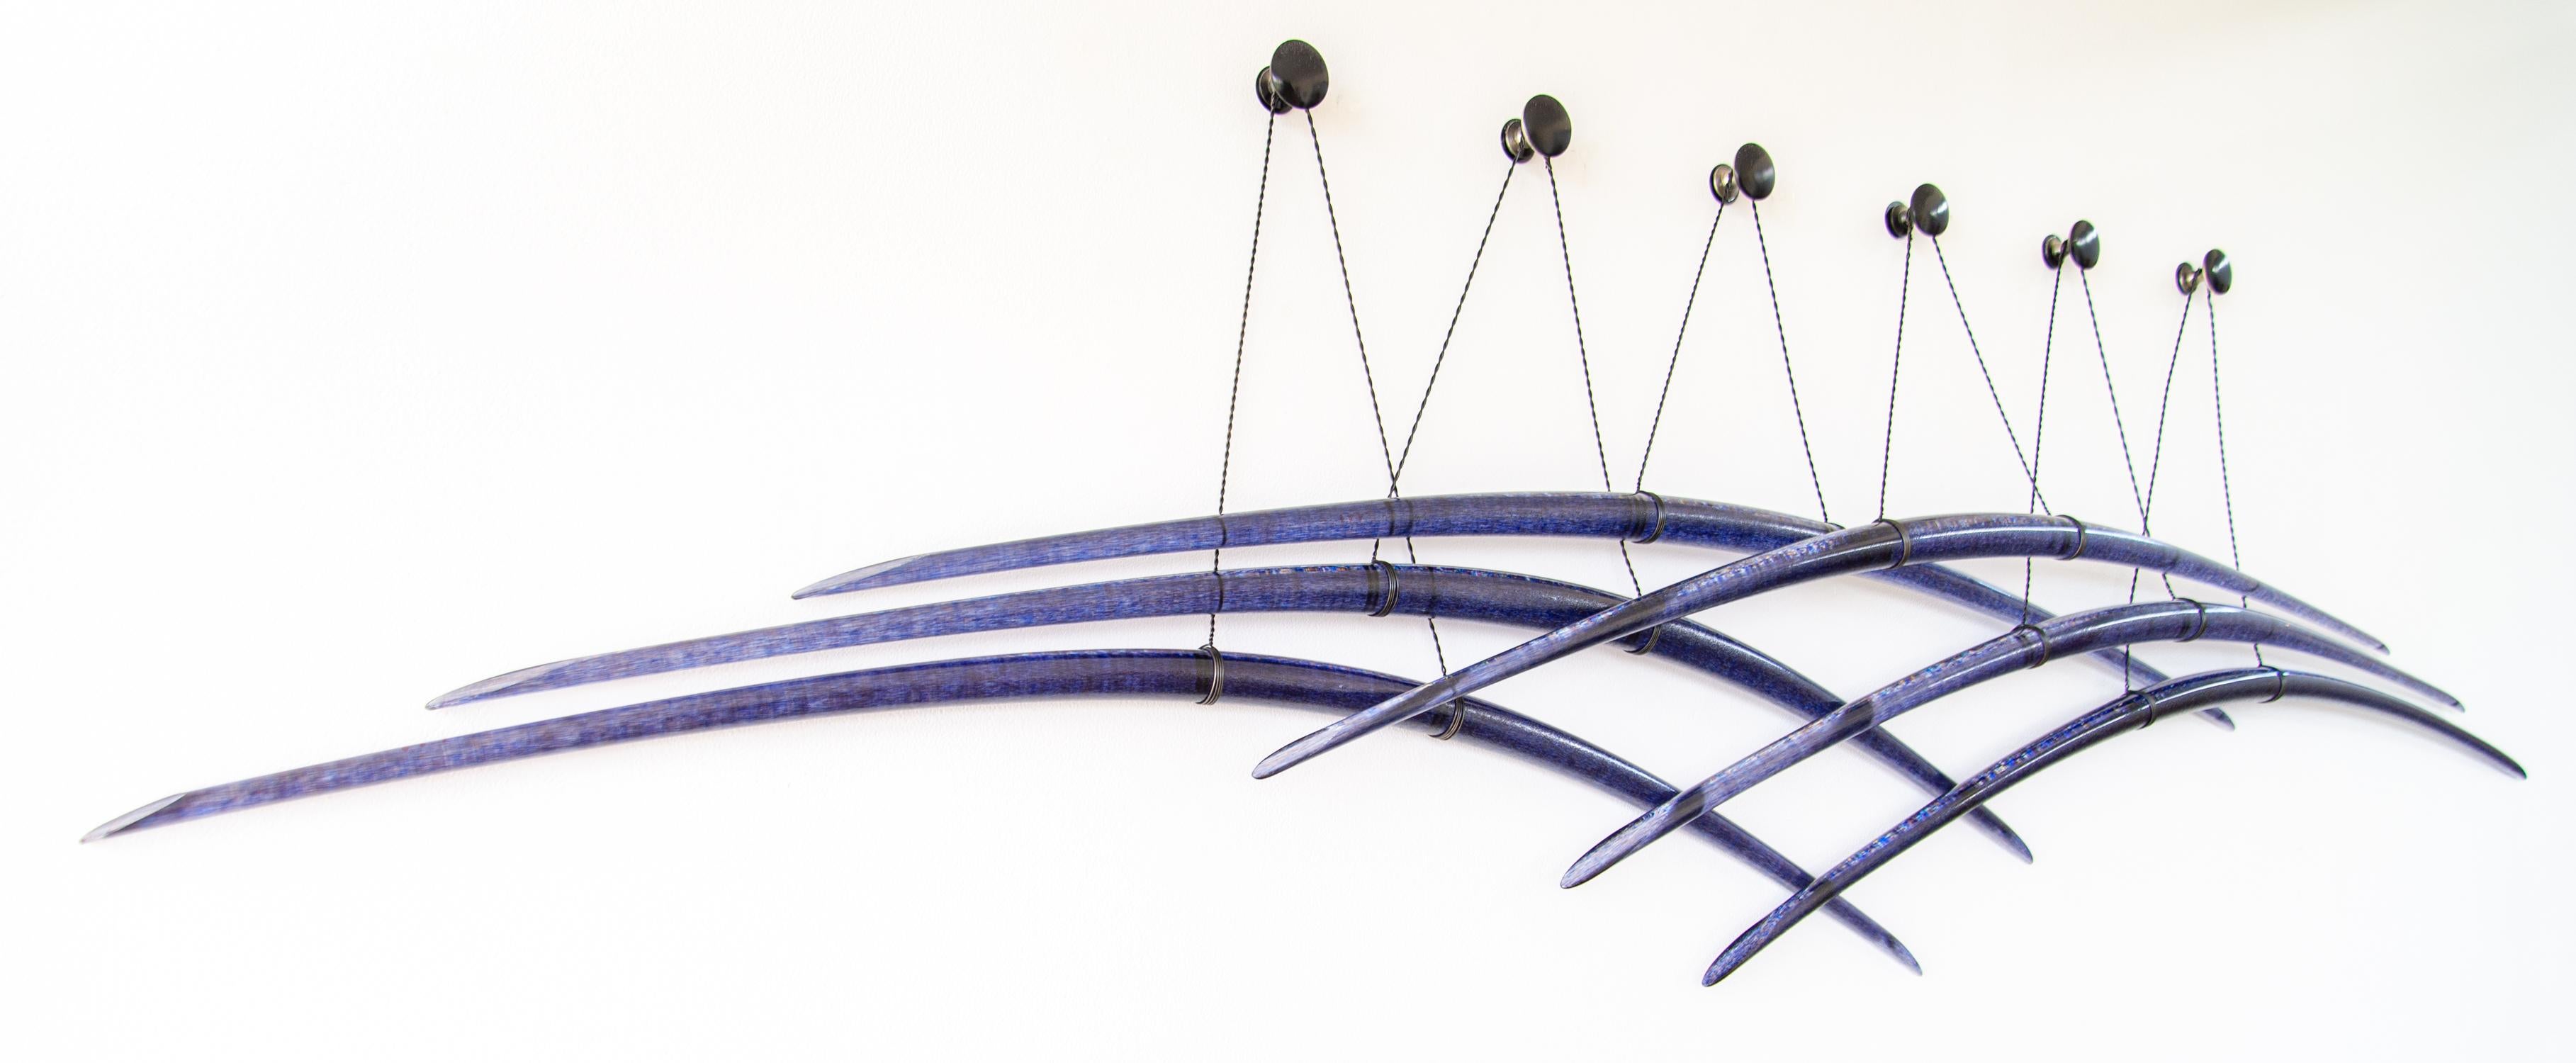 Probability Deep Blue 2 - abstract, curved, glass, suspended wall sculpture For Sale 2